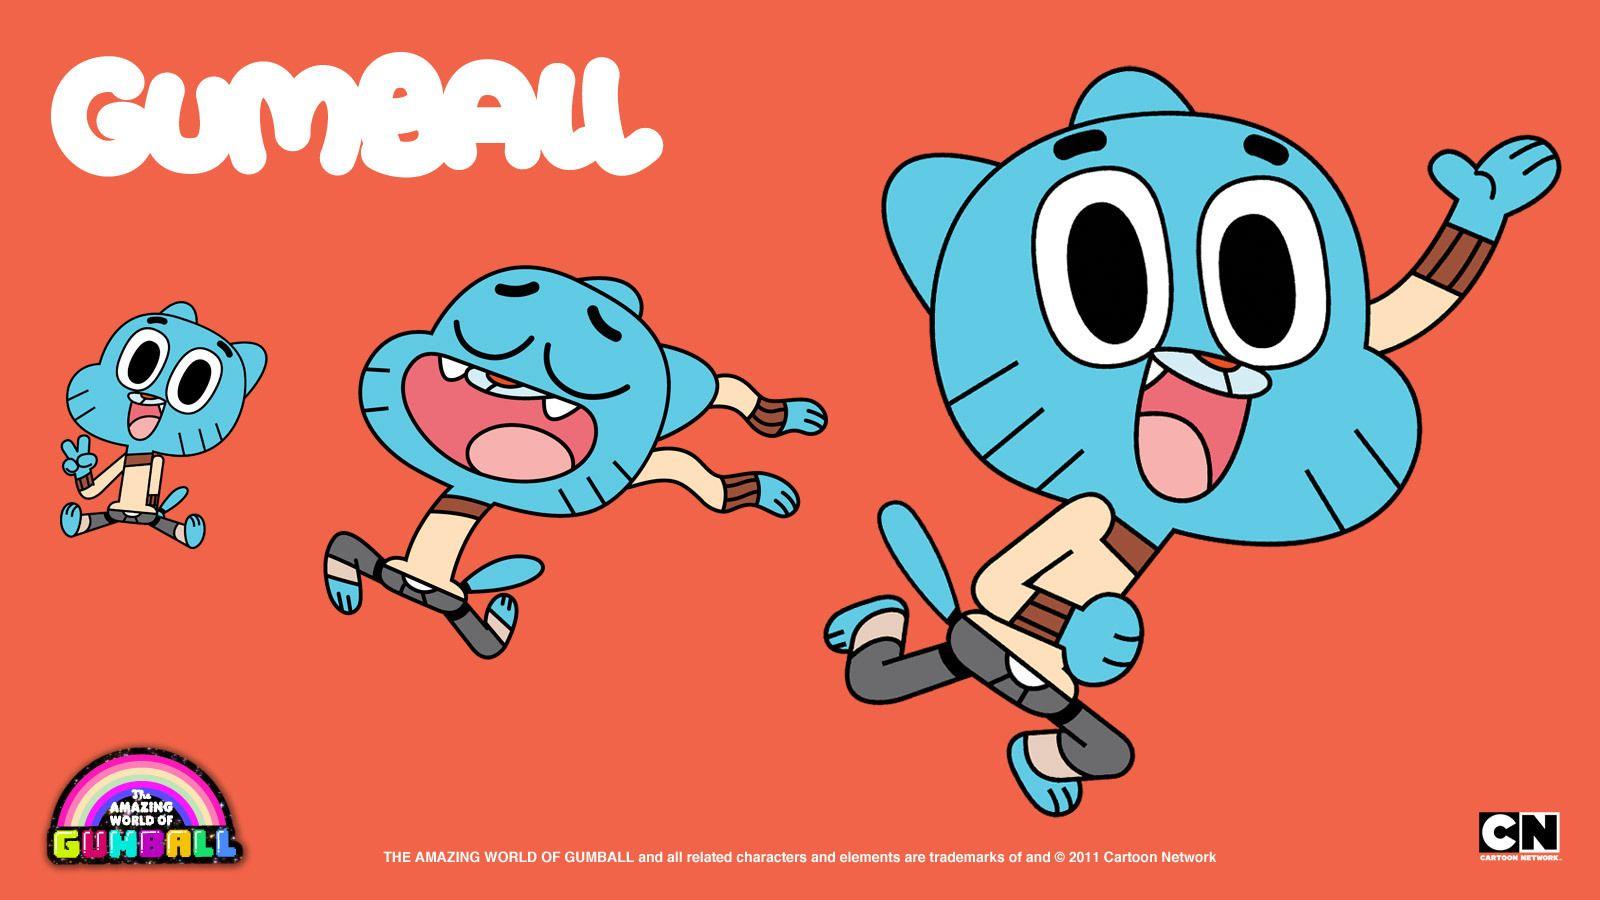 The Amazing World of Gumball Wallpaper. Candy Gumball Wallpaper, Wallpaper Gumball Watterson Available and The Amazing World of Gumball Wallpaper